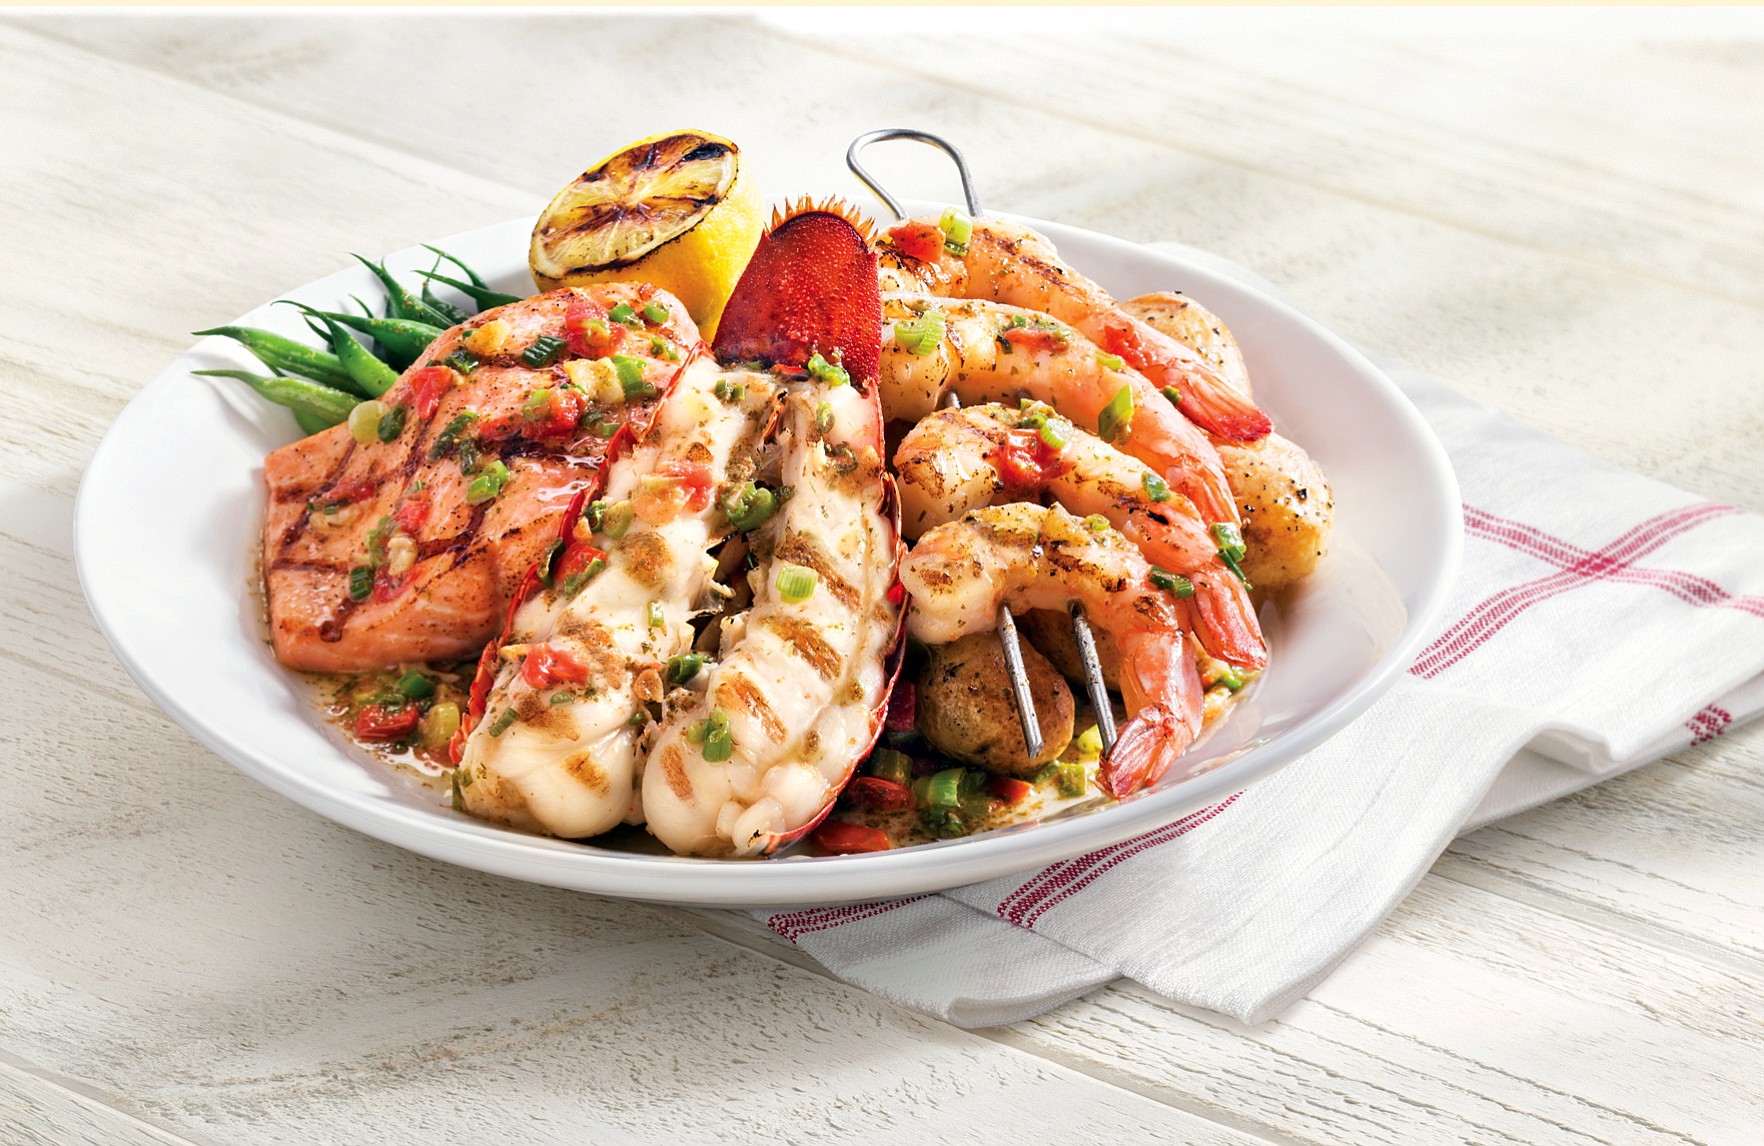 Red Lobster's new Wood-Grilled Lobster, Shrimp and Salmon is served piled on green beans and potatoes.